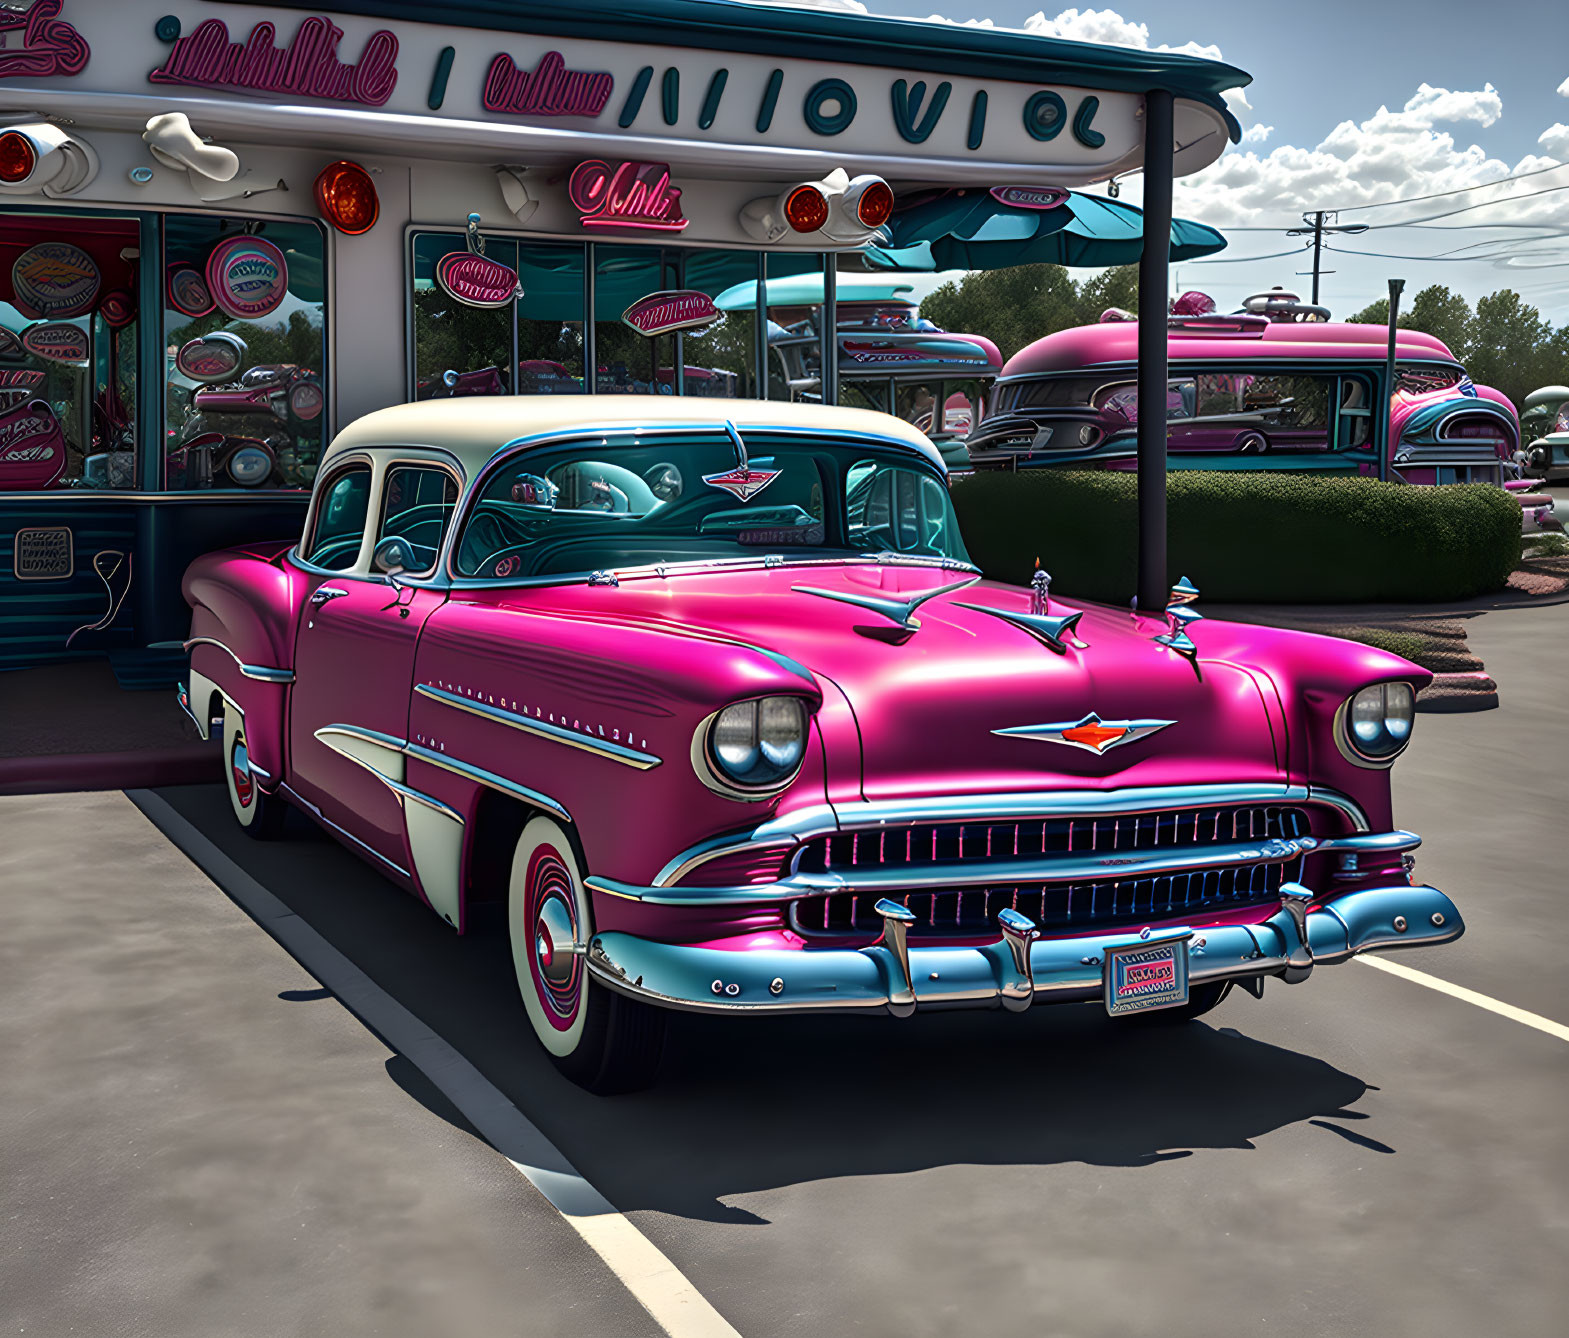 Rock-N- Roll Days with a 1950's Chevy